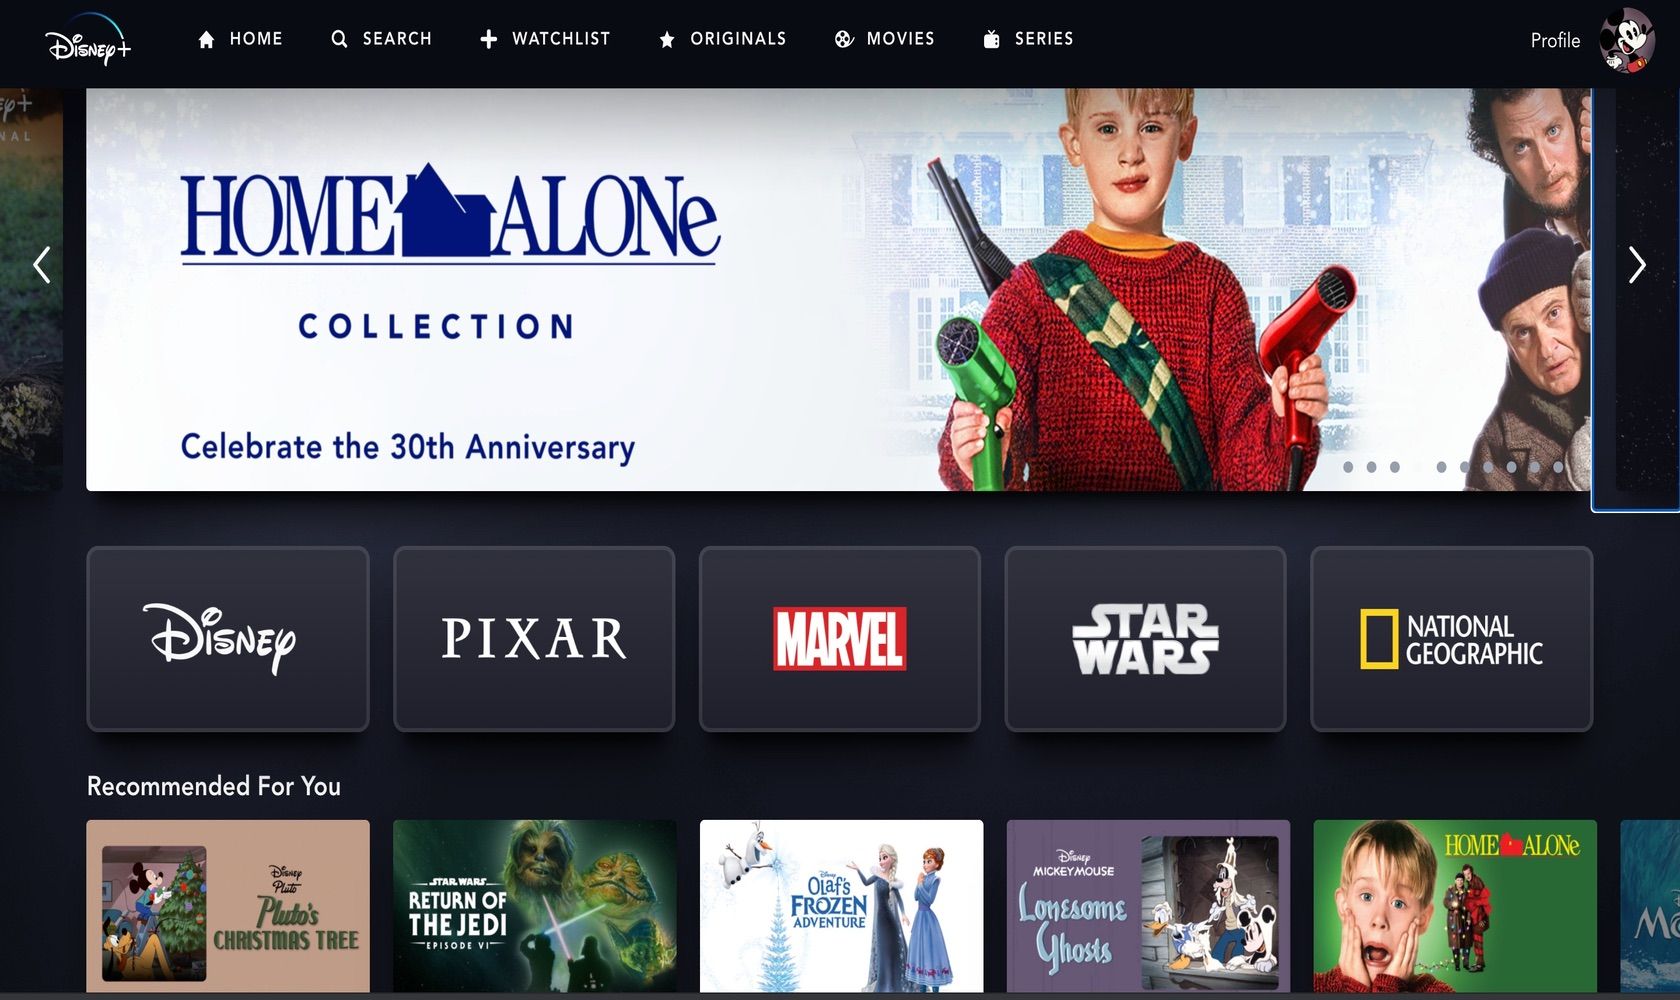 Disney+ main page of application